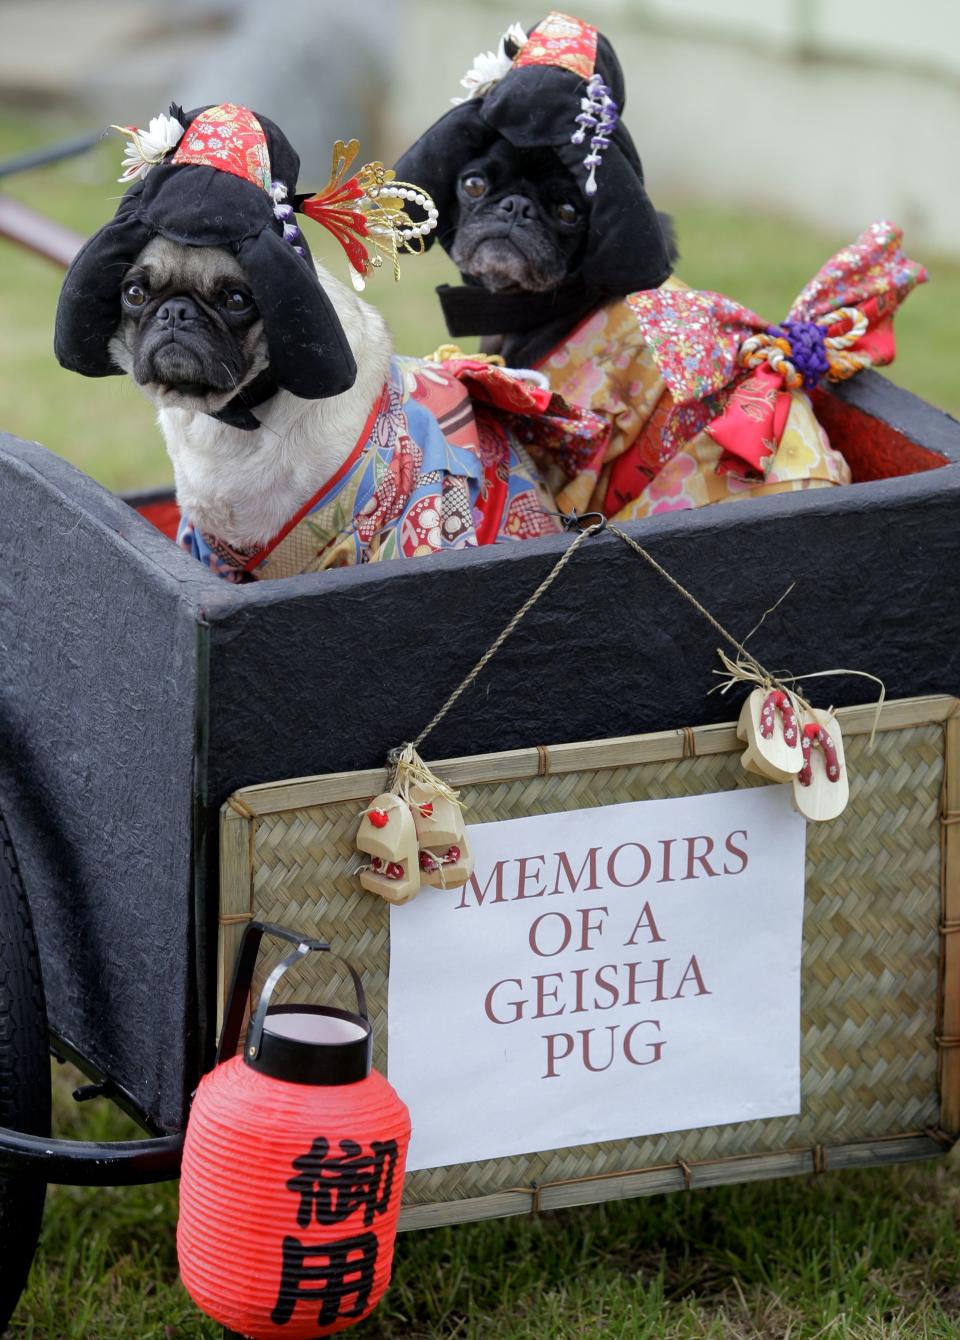 This photo taken Oct. 4, 2009 shows pugs Mochi, left, and Olive posing for a photo dressed as Geisha girls at they're home in Huntington Beach Calif. The stepsisters have been geisha girls, surfer girls and sushi over the years. They may not understand the tradition, but "pugs understand positive energy," explained dog owner, partner and costume designer Lisa Woodruff. (AP Photo/Richard Vogel)